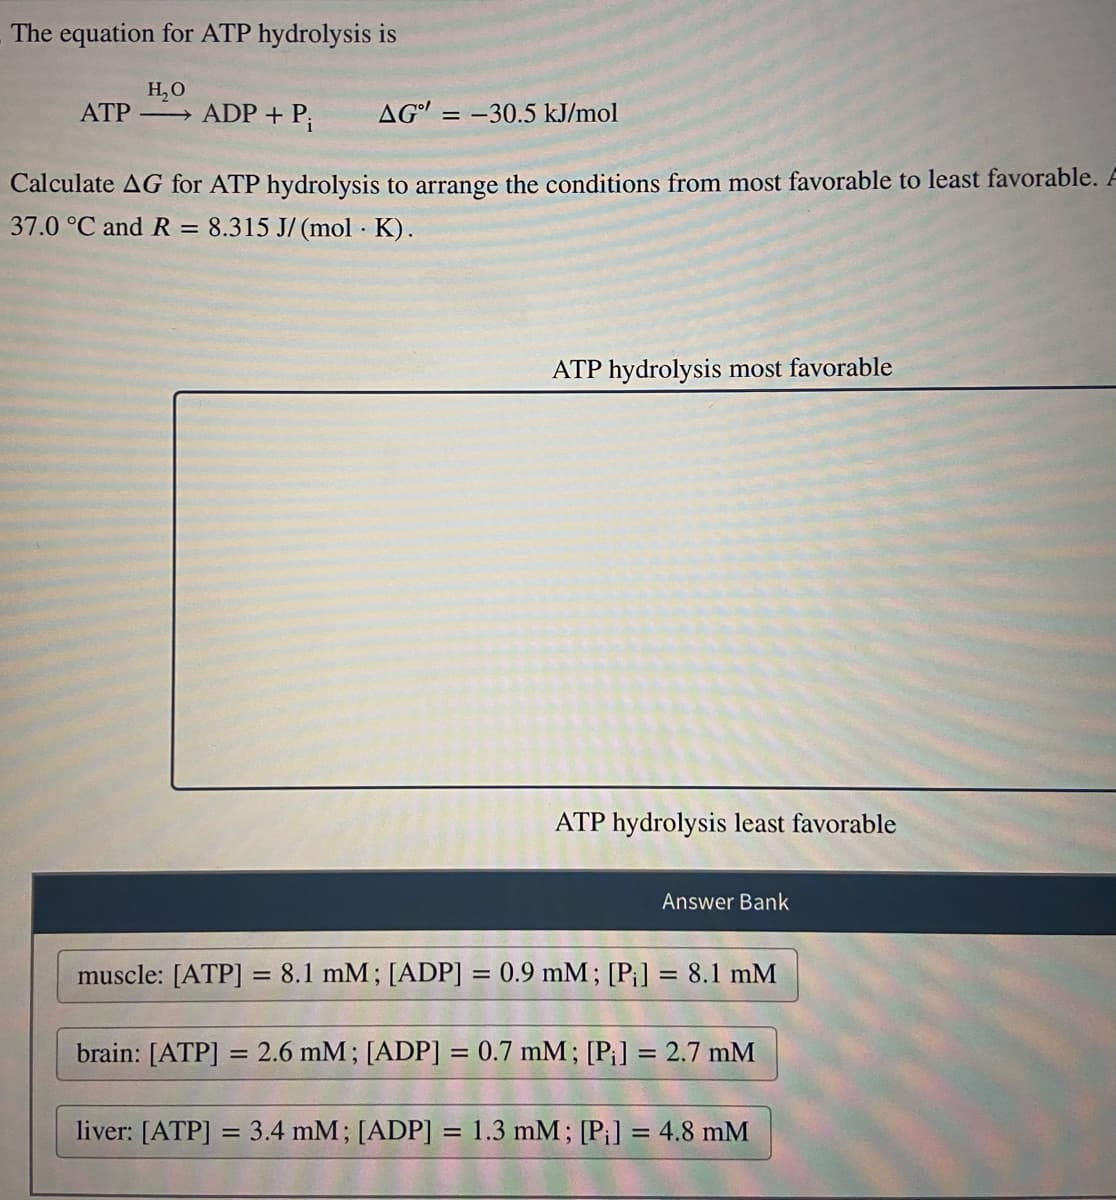 The equation for ATP hydrolysis is
H₂O
ATP→ ADP + P₁
AG"=-30.5 kJ/mol
Calculate AG for ATP hydrolysis to arrange the conditions from most favorable to least favorable. A
37.0 °C and R = 8.315 J/(mol K).
.
ATP hydrolysis most favorable
ATP hydrolysis least favorable
Answer Bank
muscle: [ATP] = 8.1 mM; [ADP] = 0.9 mM; [Pi] = 8.1 mM
brain: [ATP] = 2.6 mM; [ADP] = 0.7 mM; [Pi] = 2.7 mM
liver: [ATP] = 3.4 mM; [ADP] = 1.3 mM; [Pi] = 4.8 mM